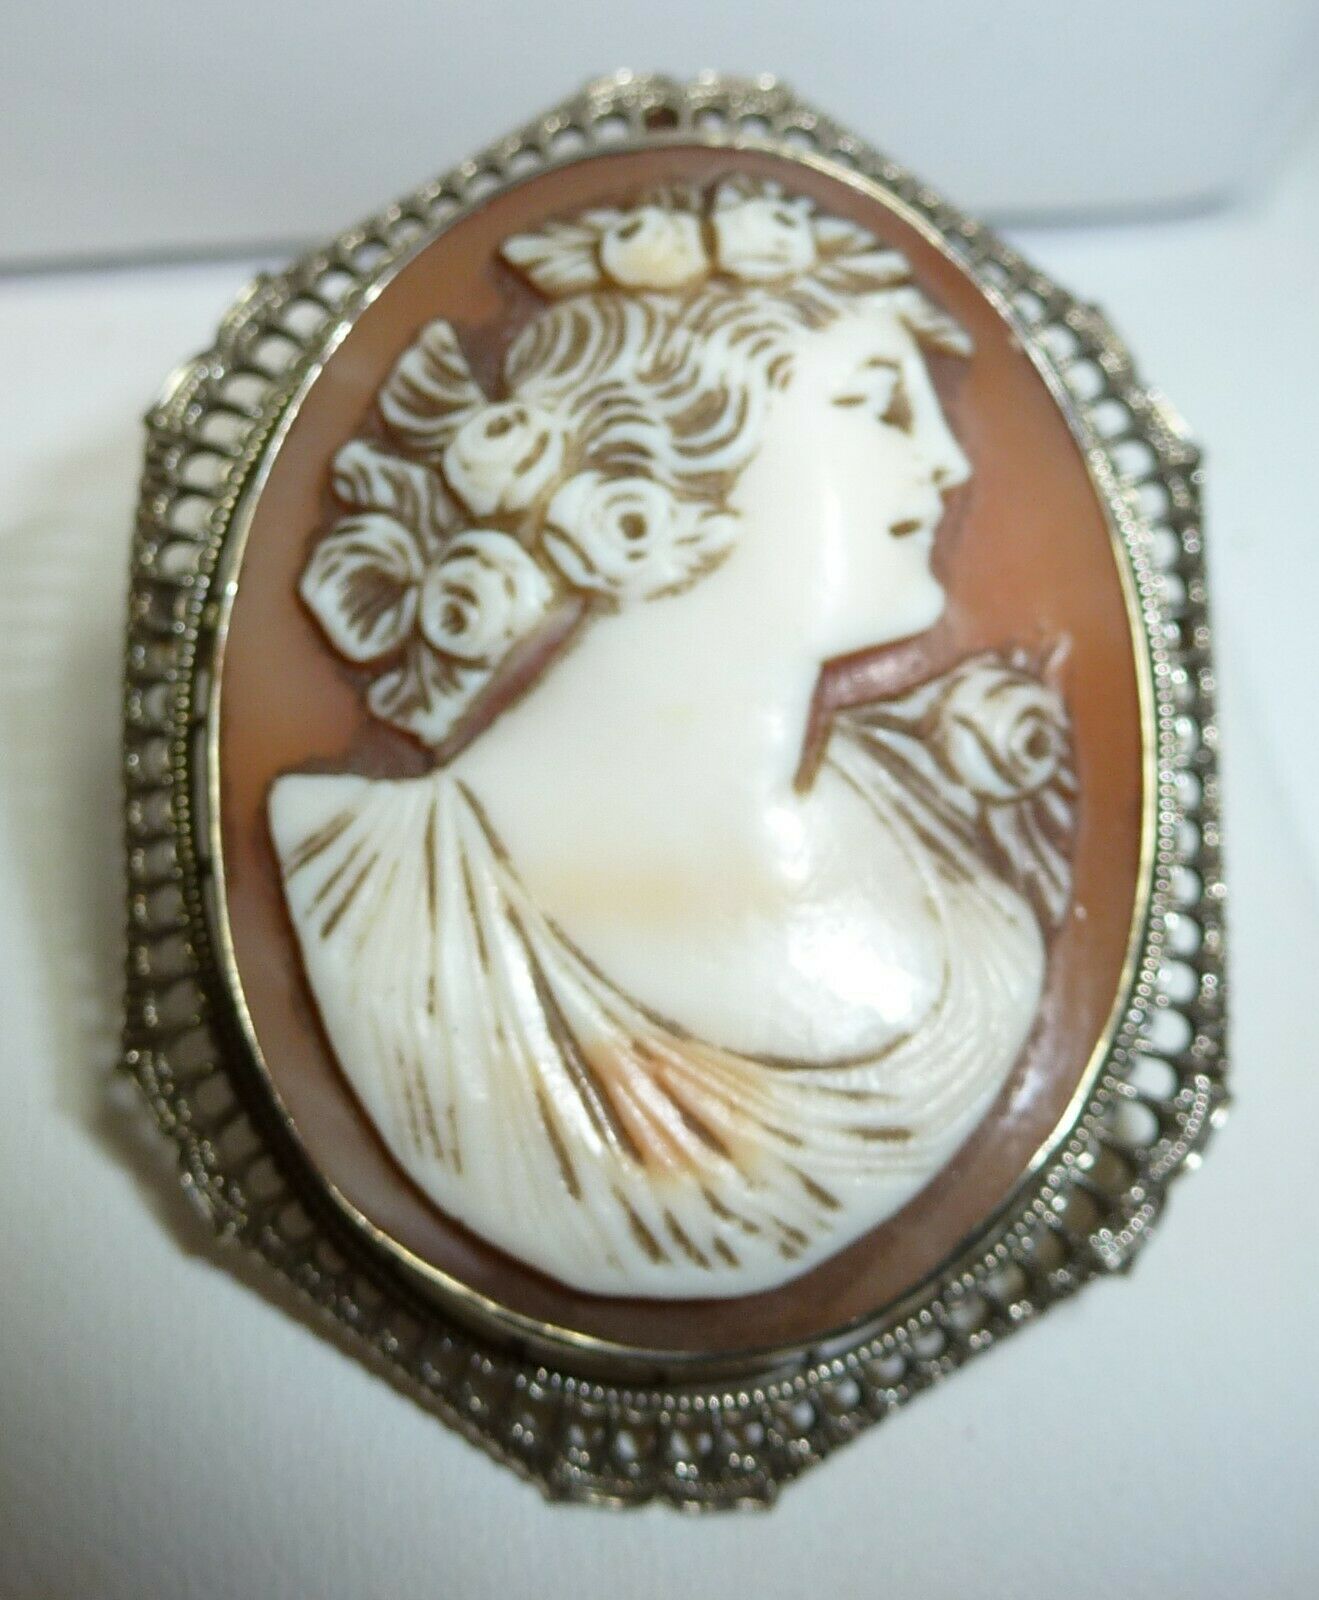 STUNNING Antique Marked 10K Gold Filigree Shell Carved Cameo Brooch Pendant